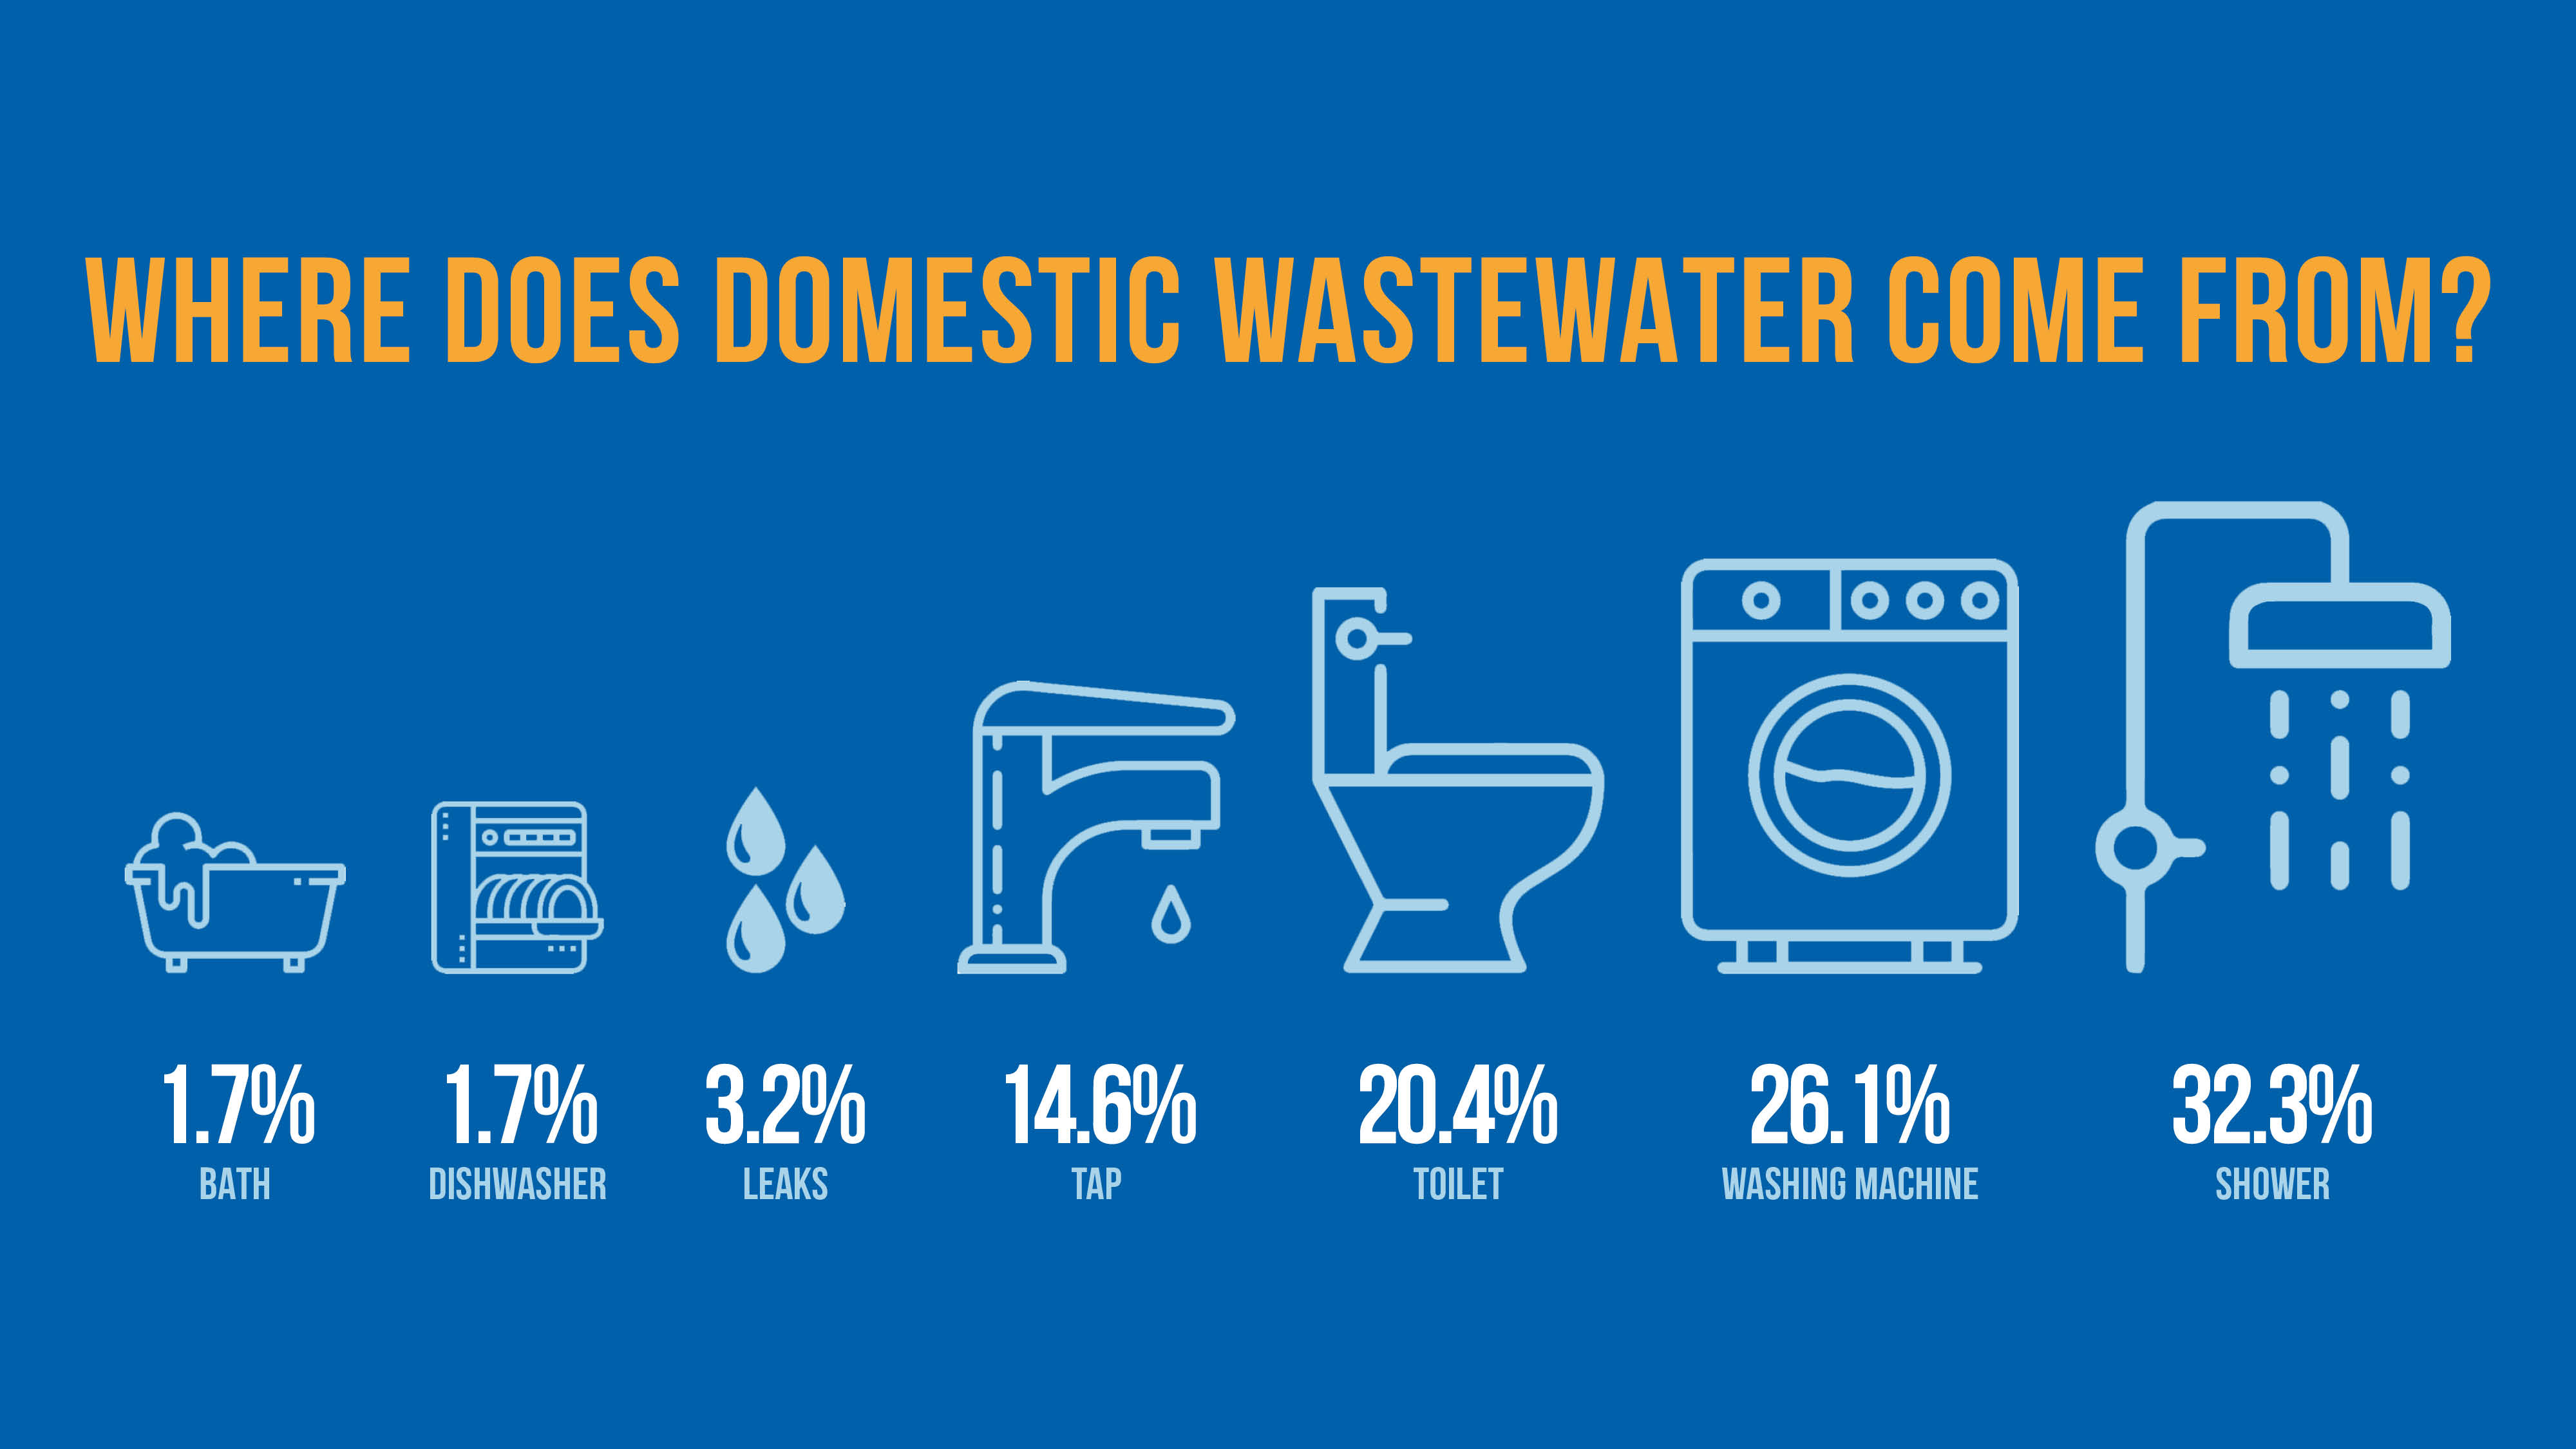 Photo shows infographics and statistics of where wastewater is generated in your home: 1.7% each bath and dishwasher, 3.2% leaks, 14.6% tap, 20.4% toilet, 26.1% washing machine, 32.3% shower.